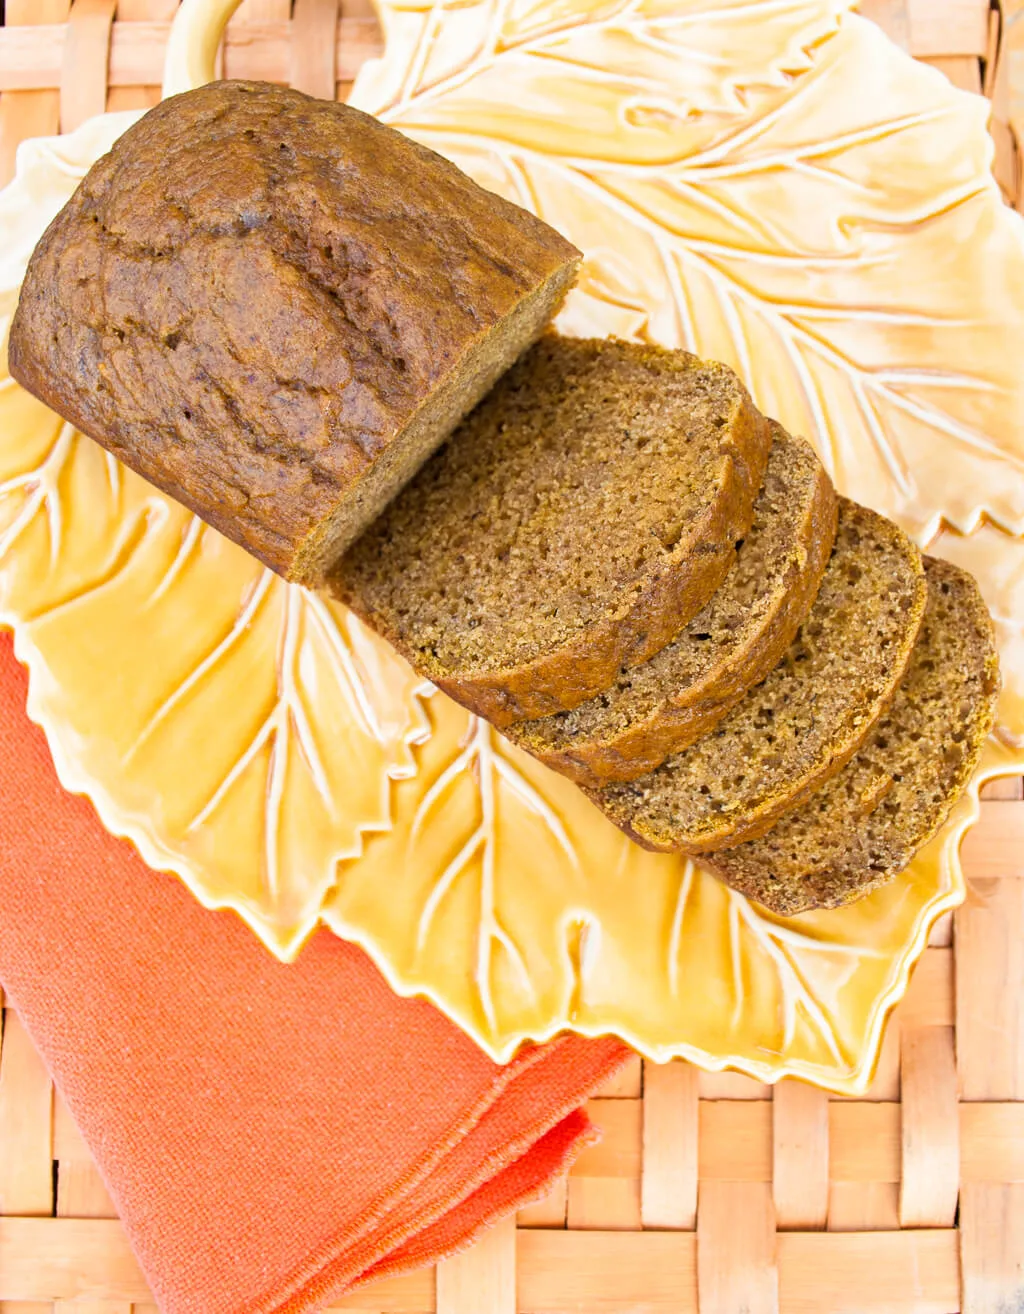 Pumpkin banana bread recipe with less sugar, coconut oil, healthier flours and pumpkin pie spice. Make it as mini-loaves or full-loaves.